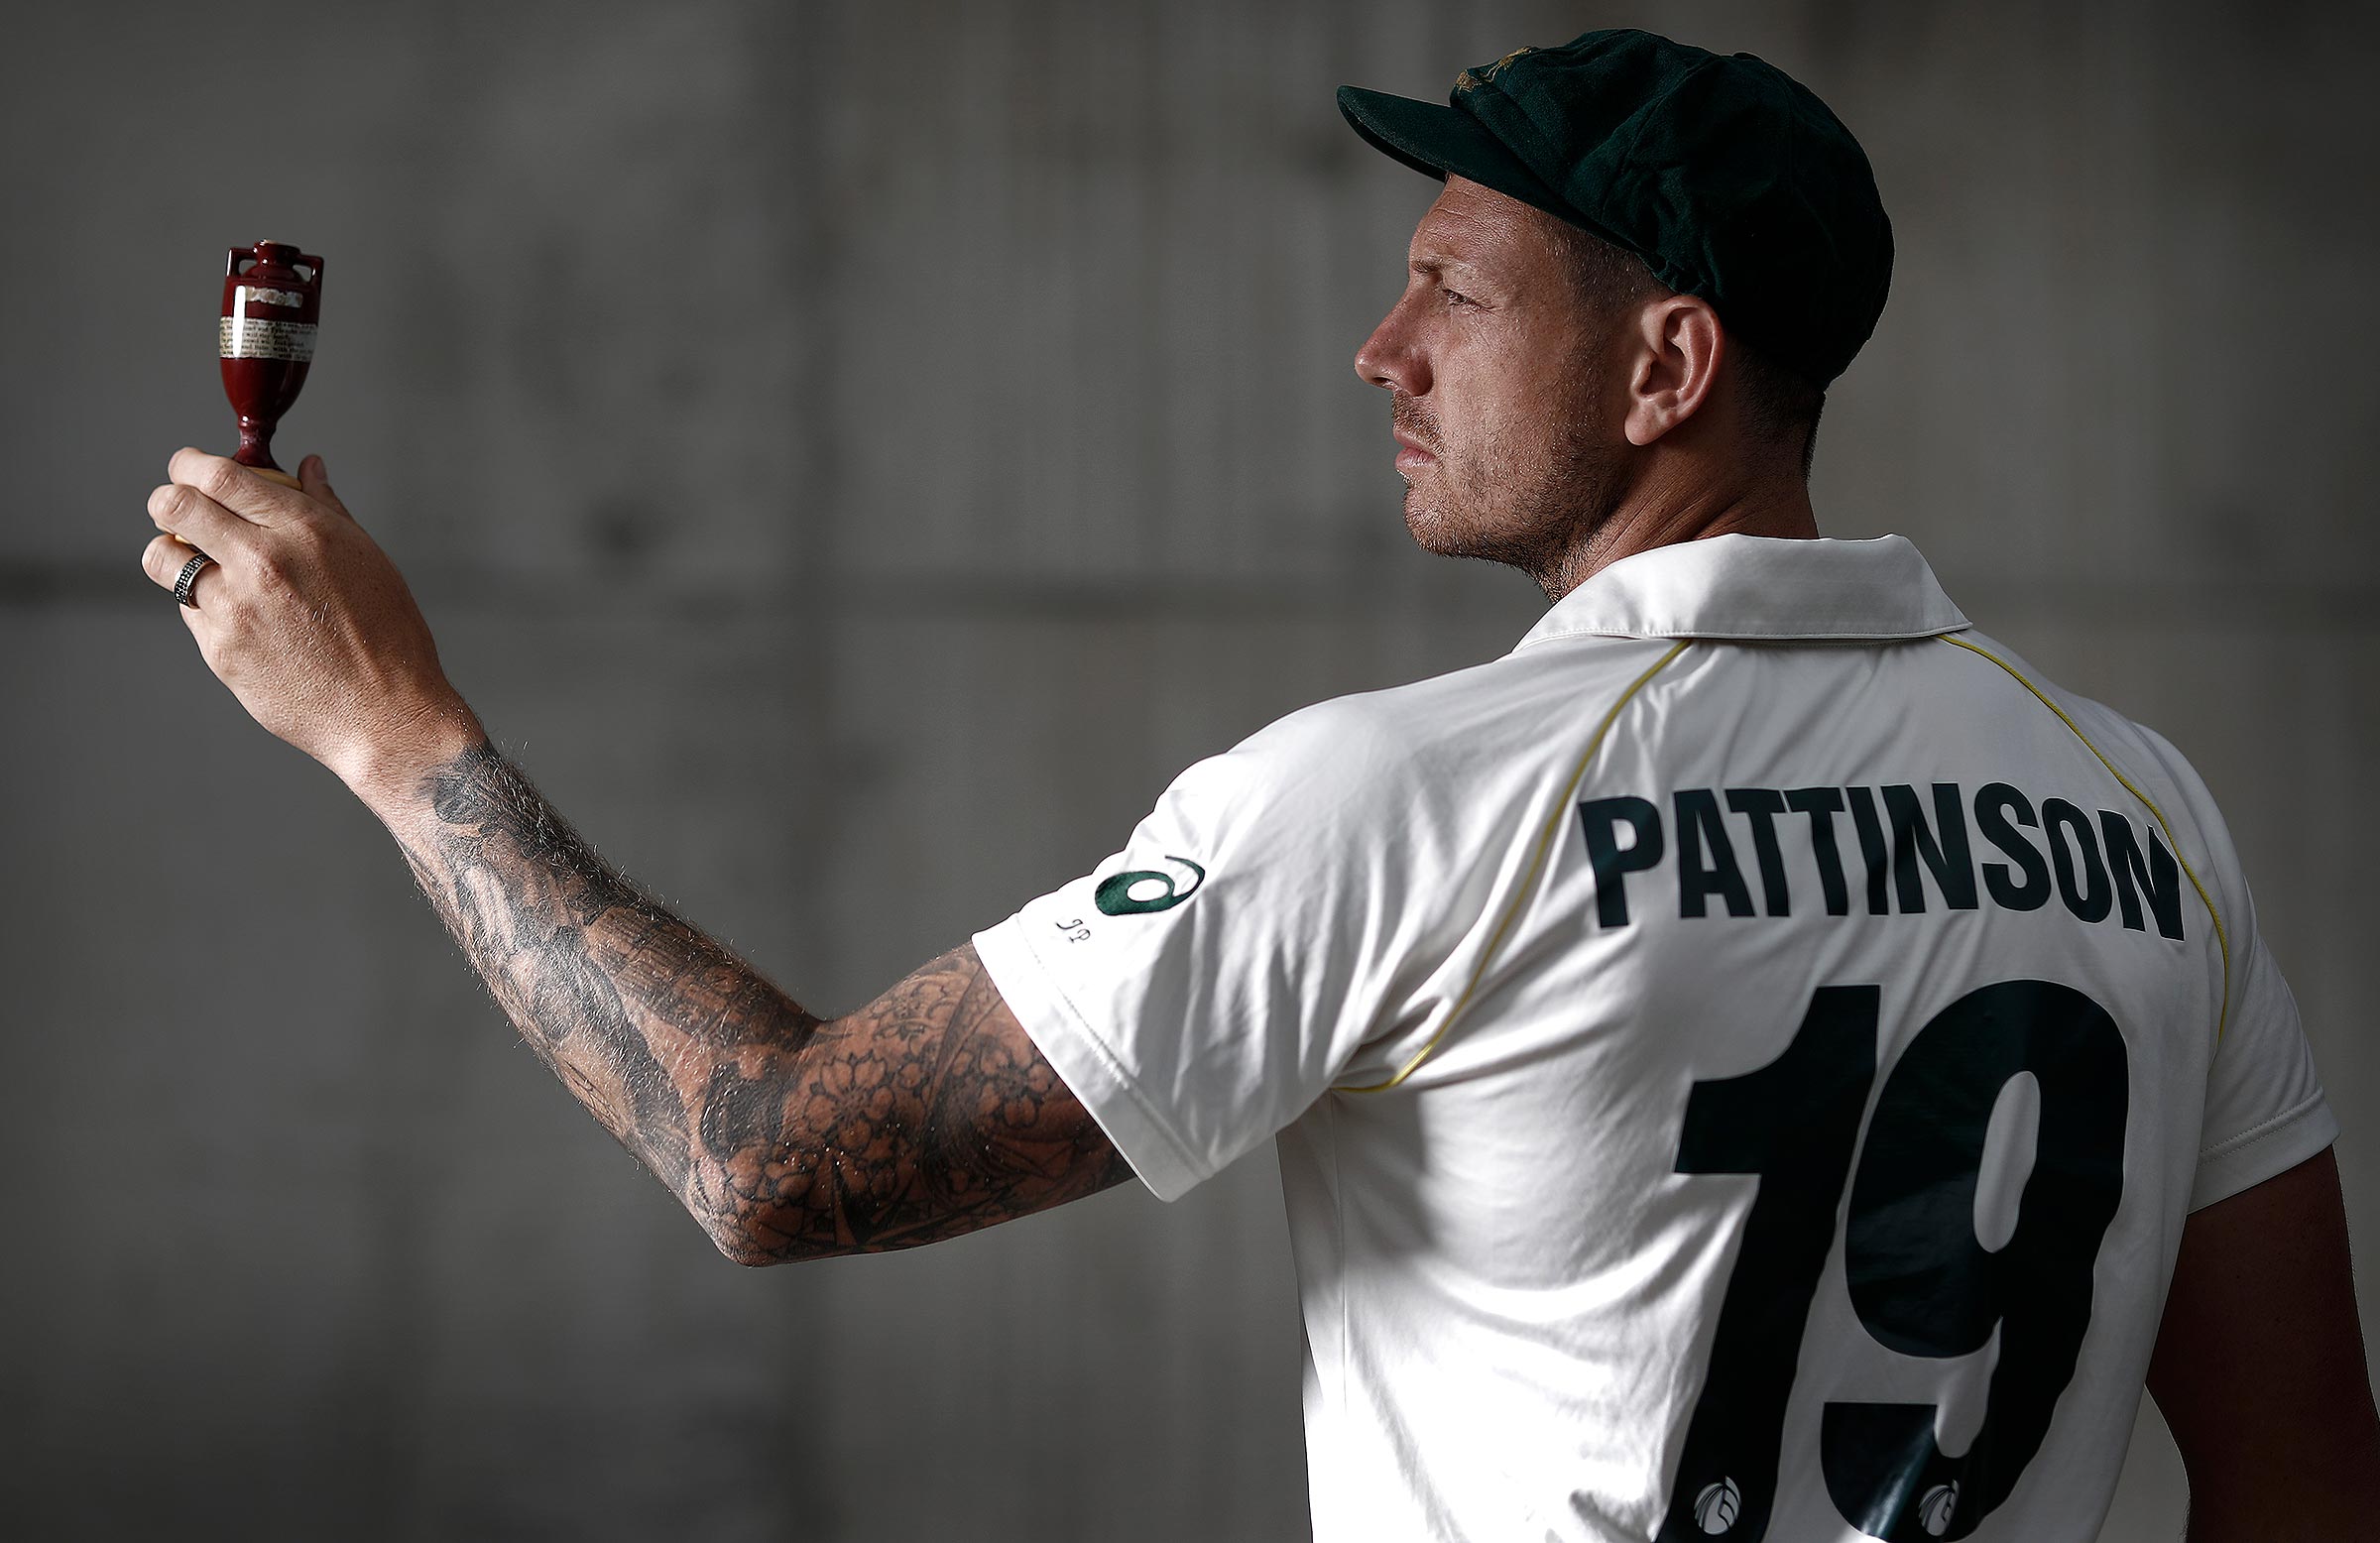 Pat Cummins tried to convince me to stay, reveals James Pattinson after ‘emotional’ retirement call